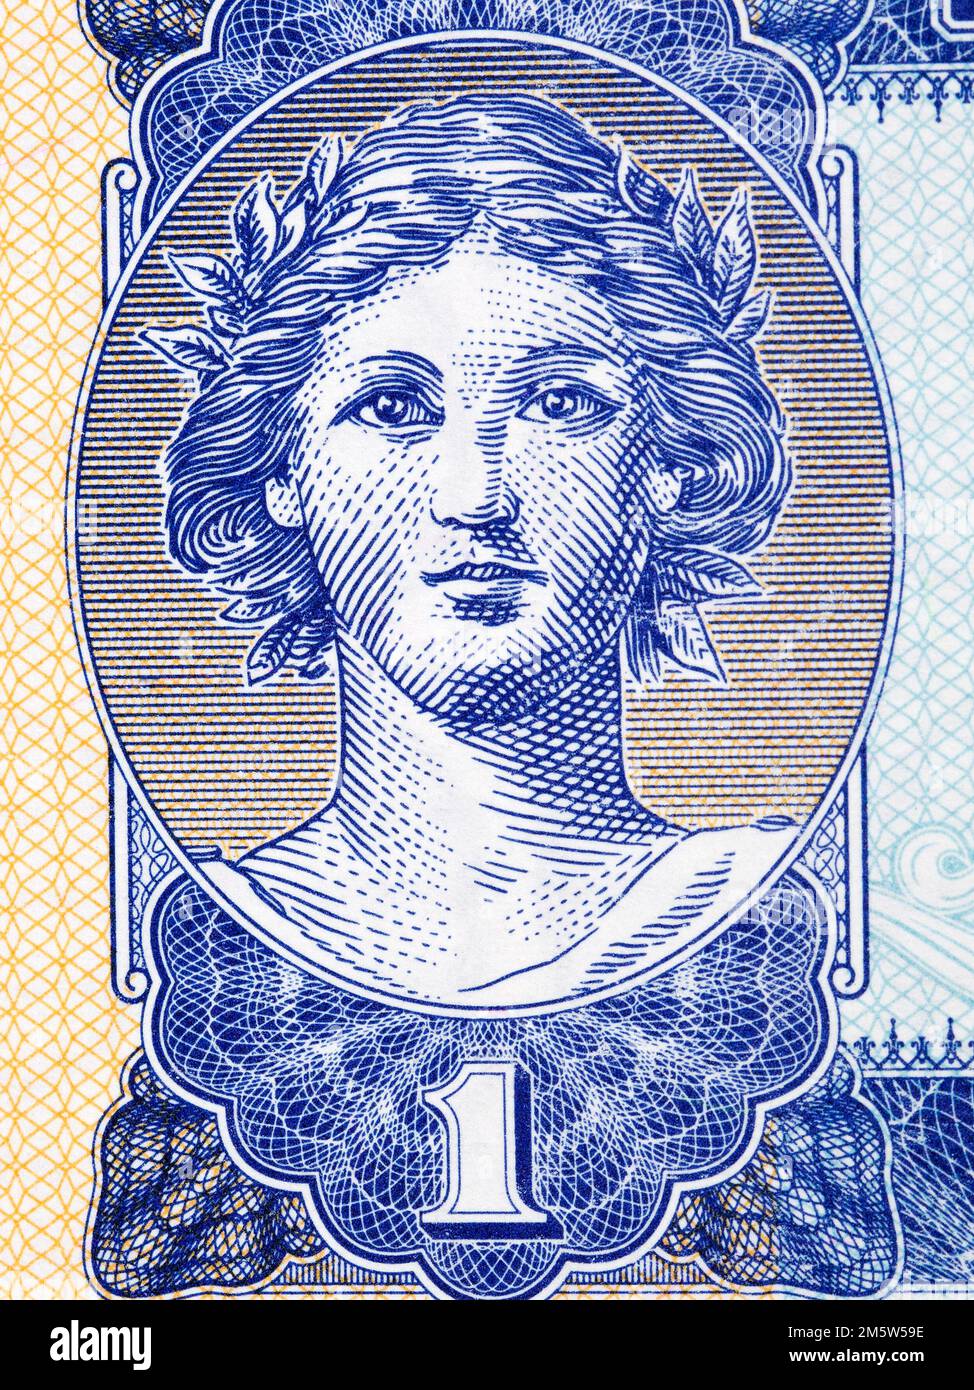 Girl's portrait according to historical engraving from money Stock Photo